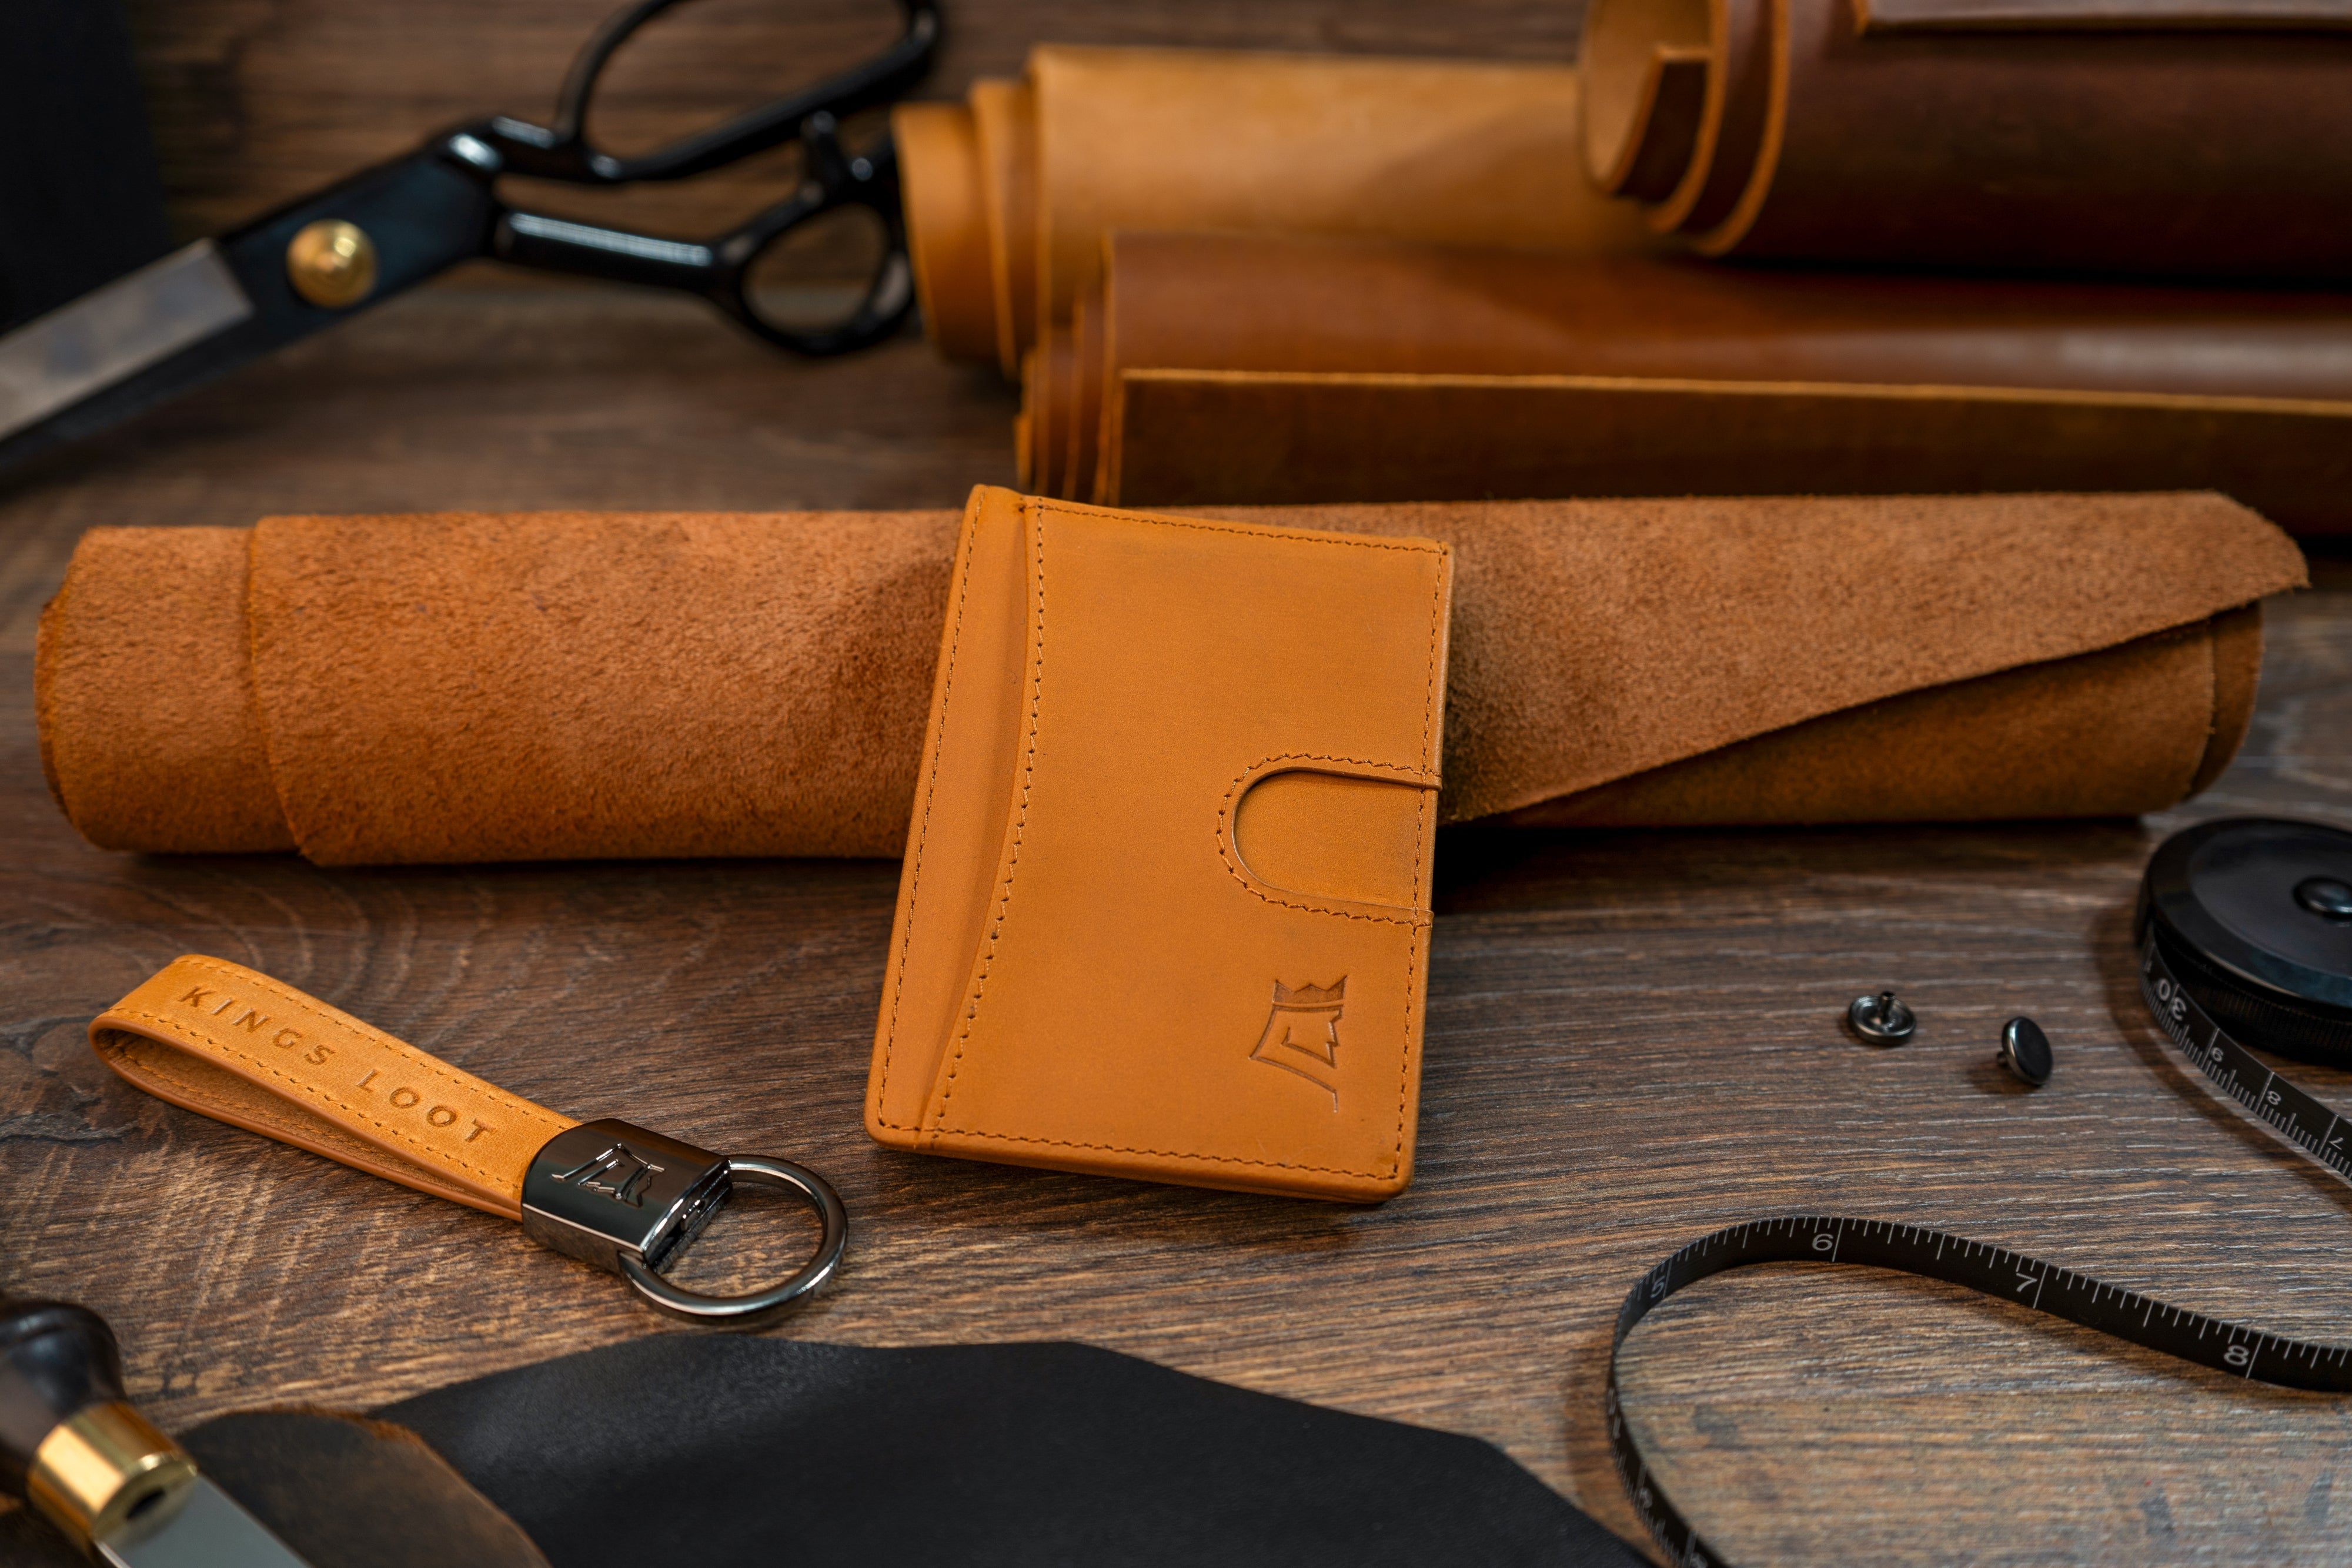 Leather wallet, keychain, rolled pouches, and accessories on a wooden surface.